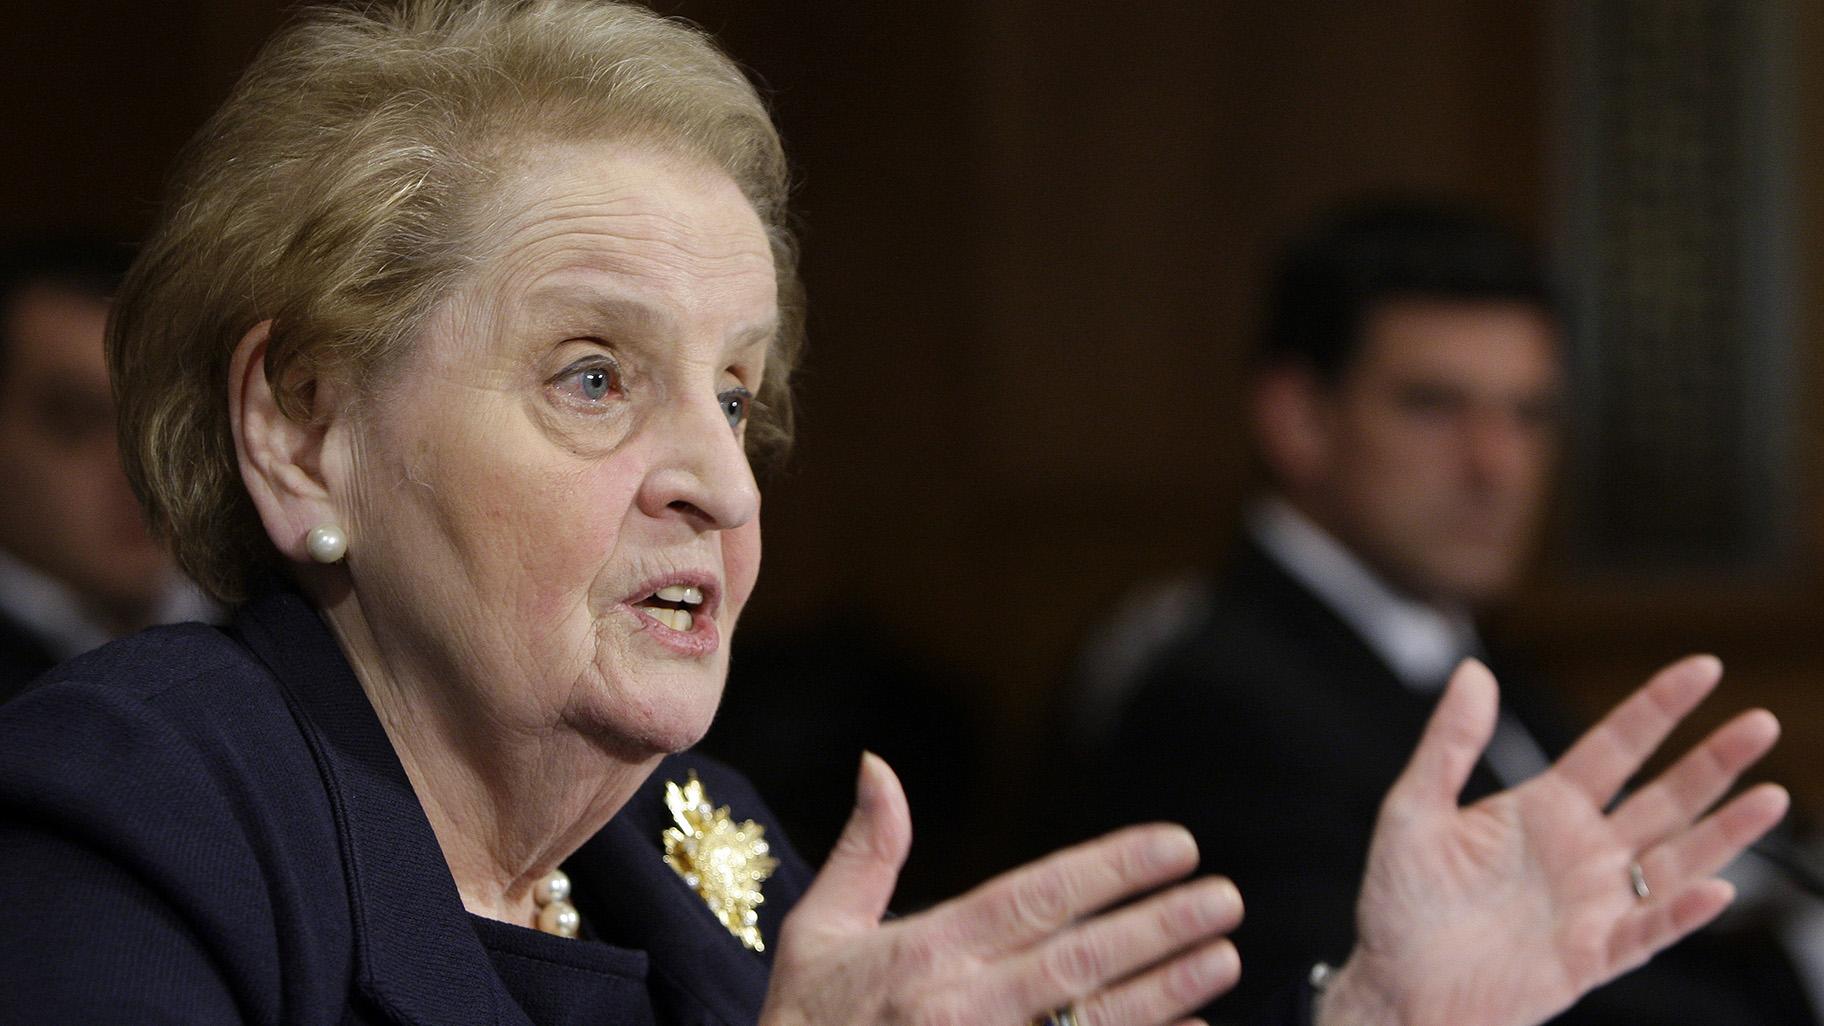 Former Secretary of State Madeleine Albright testifies on Capitol Hill in Washington, on Oct. 22, 2009 before the Senate Foreign Relations Committee hearing on NATO. (AP Photo / Haraz N. Ghanbari, File)